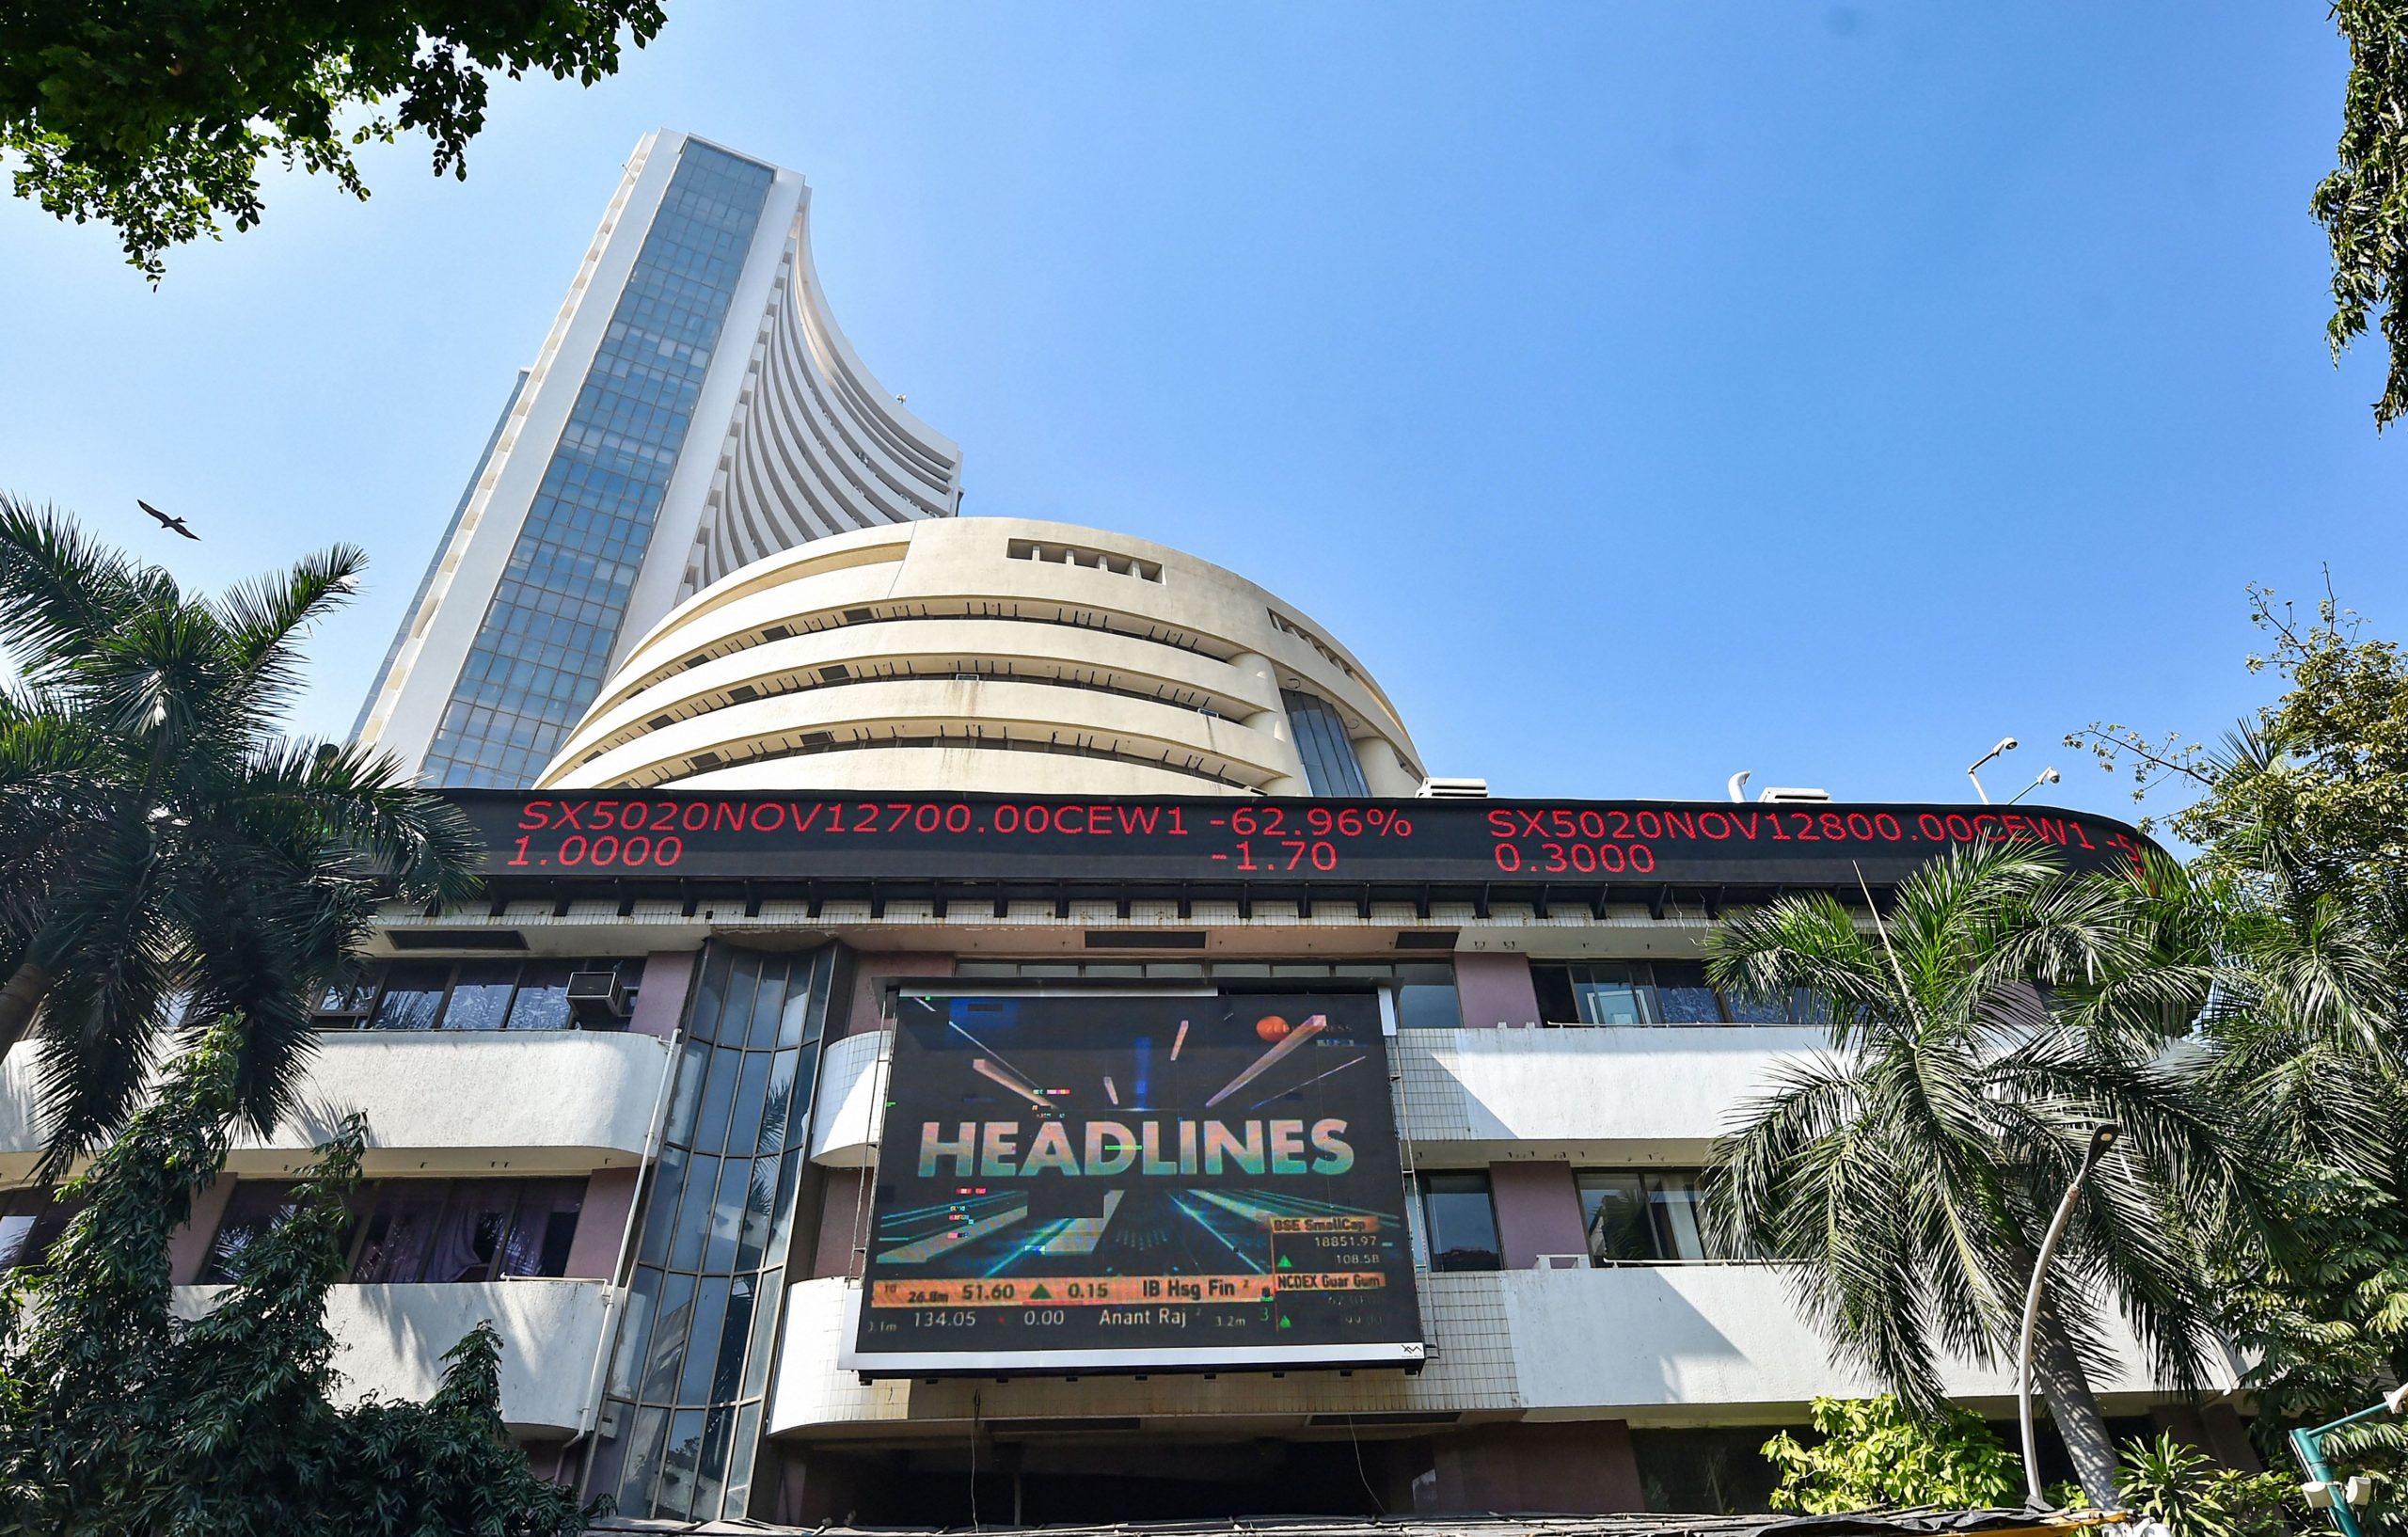 Trending Stocks: Reliance, Vedanta, PVR, M&M, Emami and others in news today